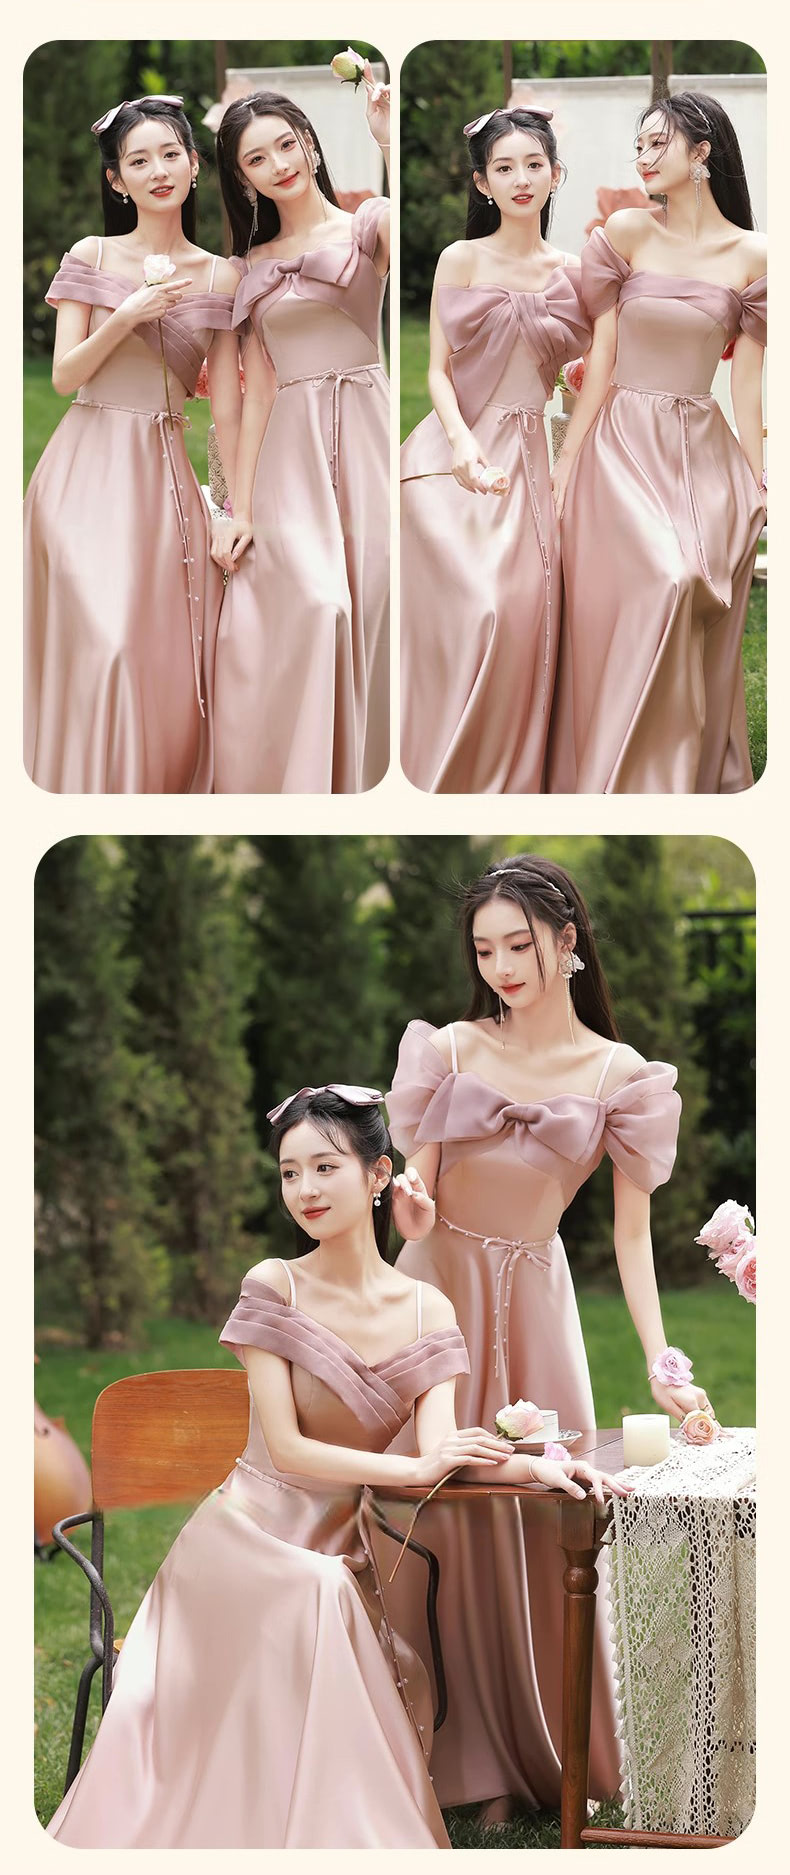 Sweet-Pink-Satin-Bridesmaid-Dress-Wedding-Prom-Guest-Formal-Outfit14